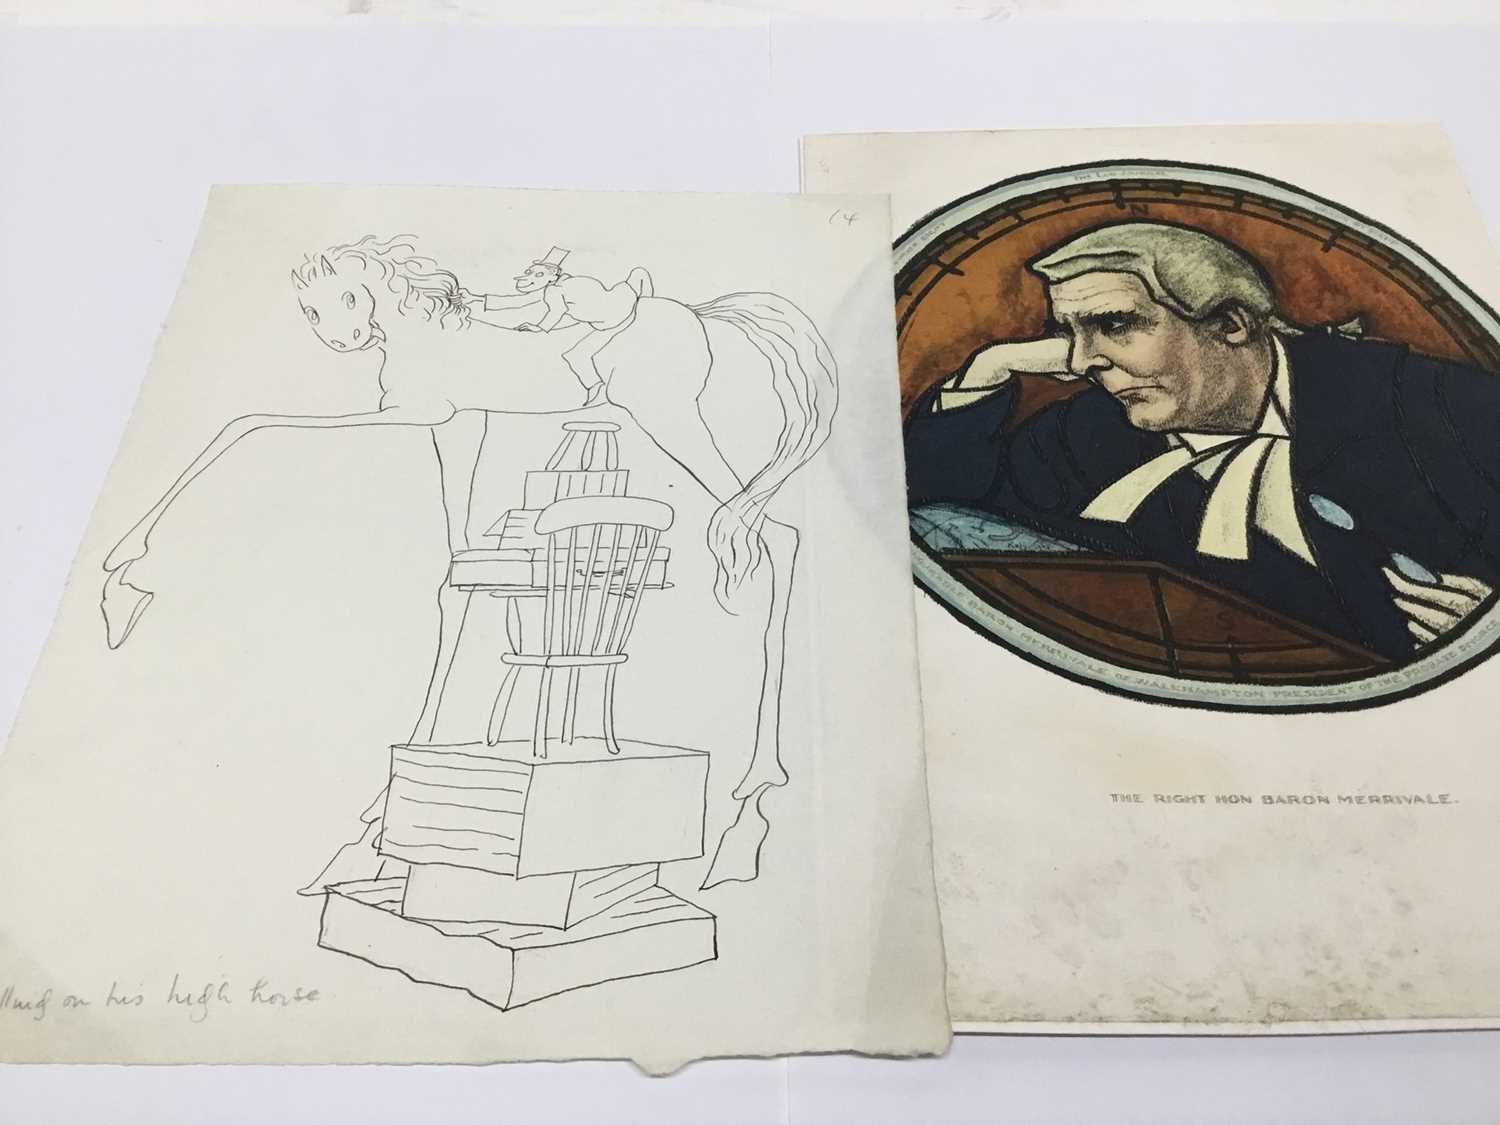 Lot 120 - Helen Kapp (1901-1978) pen and ink ‘Getting in his high horse’ signed verso, 39 x 23cm, and print of Rt Hon Baron Merrivale signed Edmond X Kapp 1925 signed